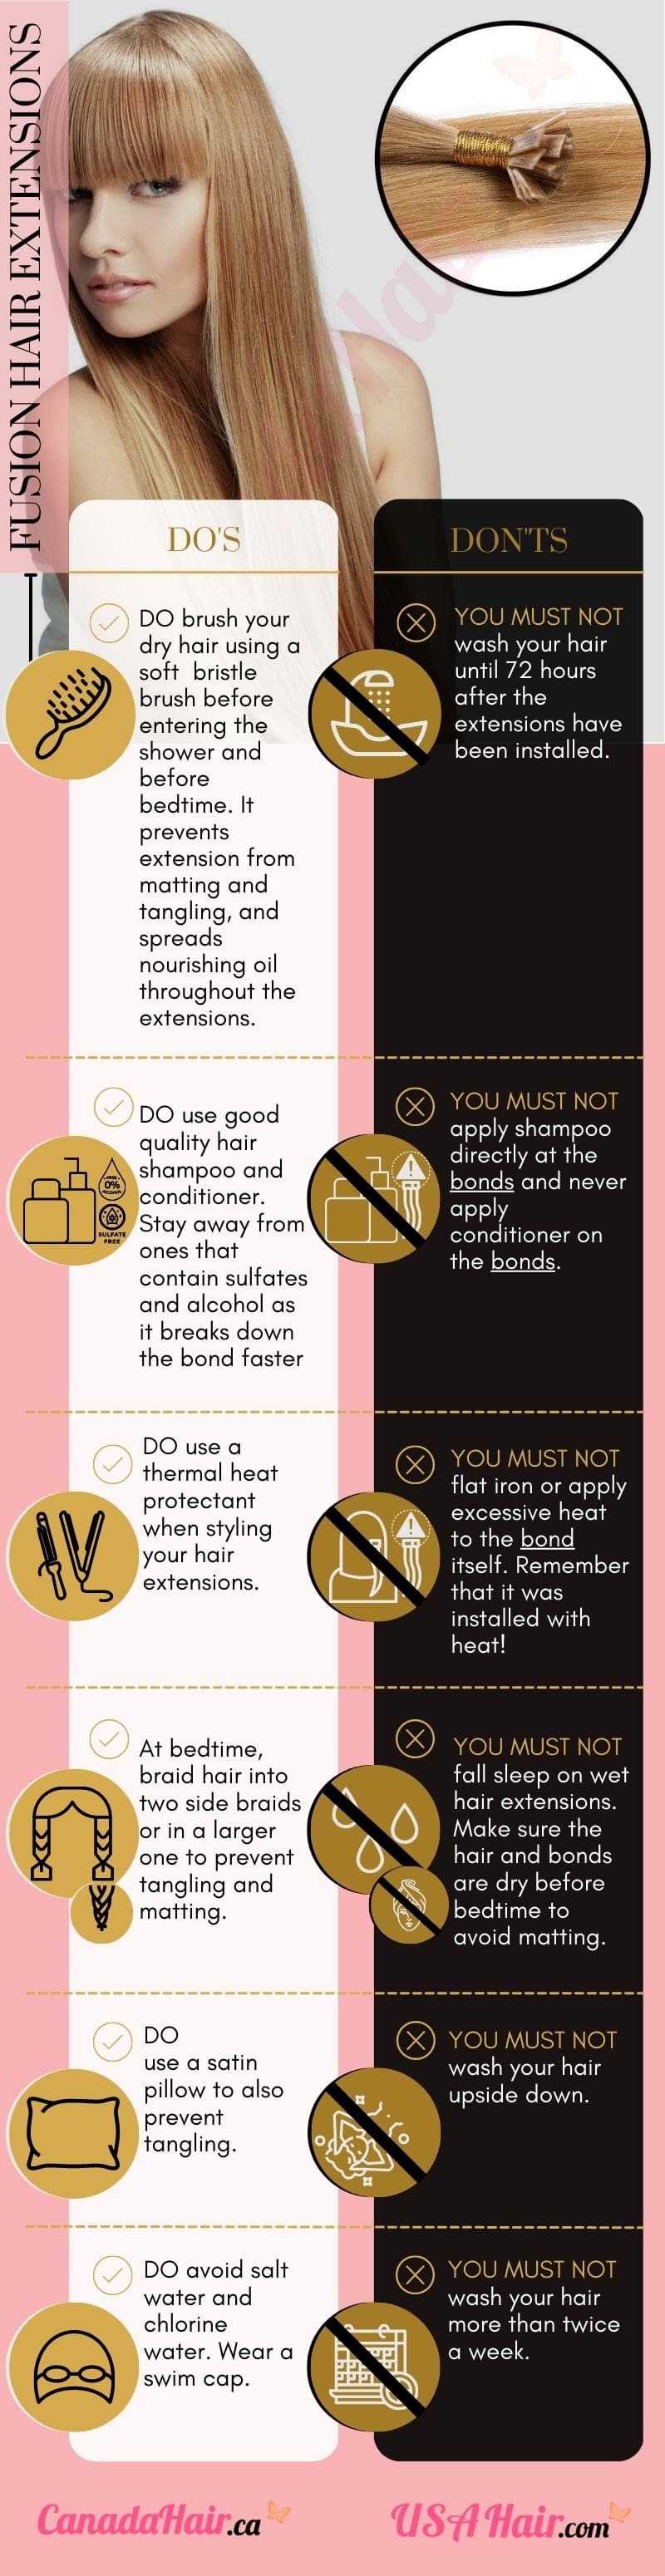 Do's and Dont's FUSION \(800 x 3100 px\)-min.jpg